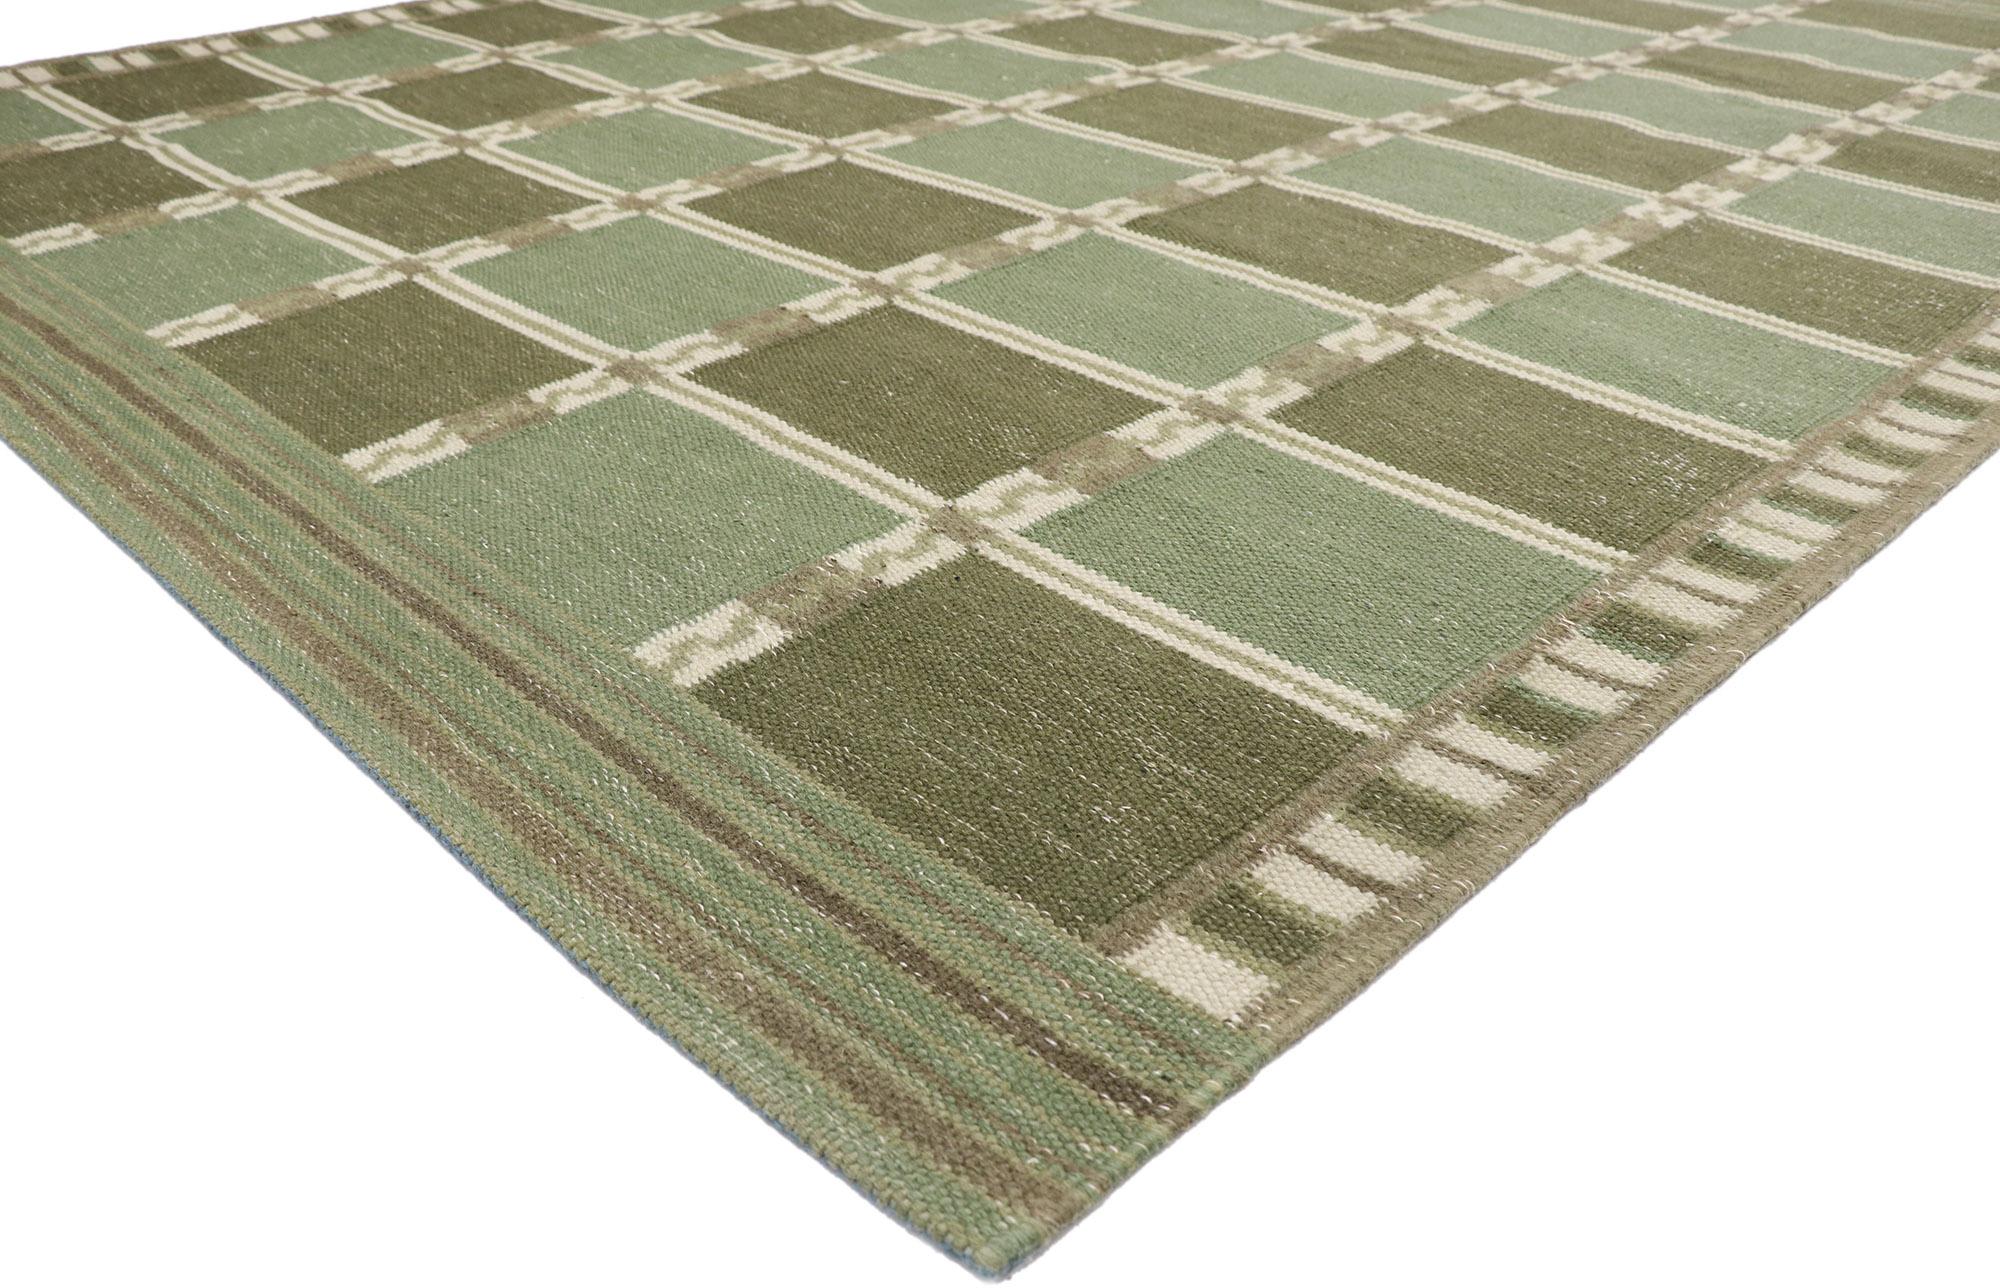 30669, new Swedish Inspired Kilim rug with Scandinavian Modern style. With its simplicity, geometric design and earth-tone colors, this hand-woven wool Swedish Indian Kilim rug provides a feeling of cozy contentment without the clutter. The abrashed